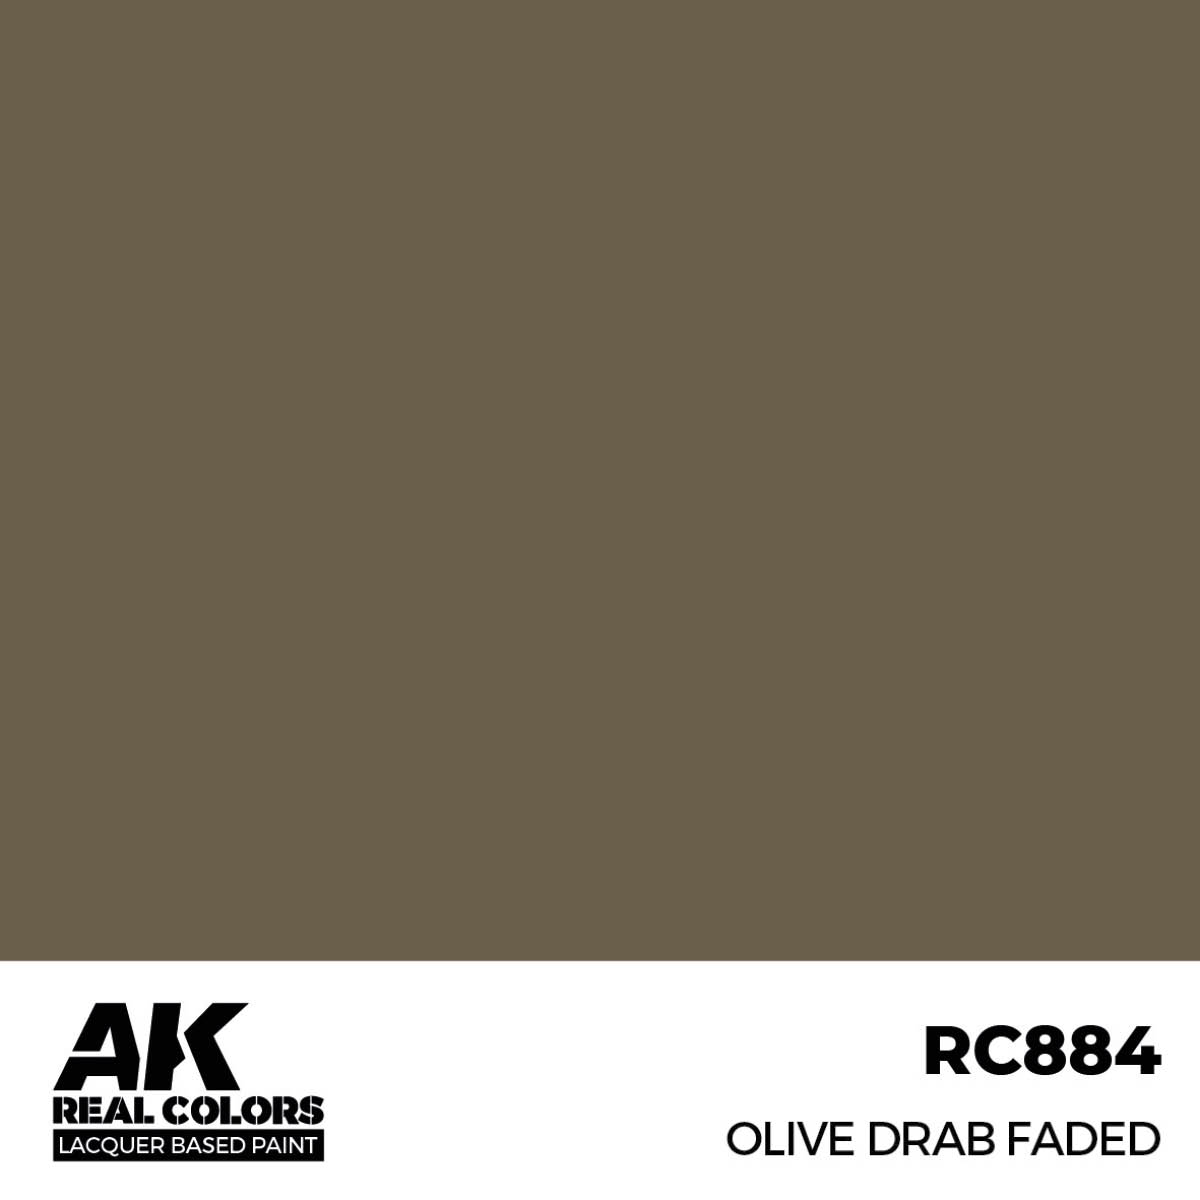 Olive Drab Faded